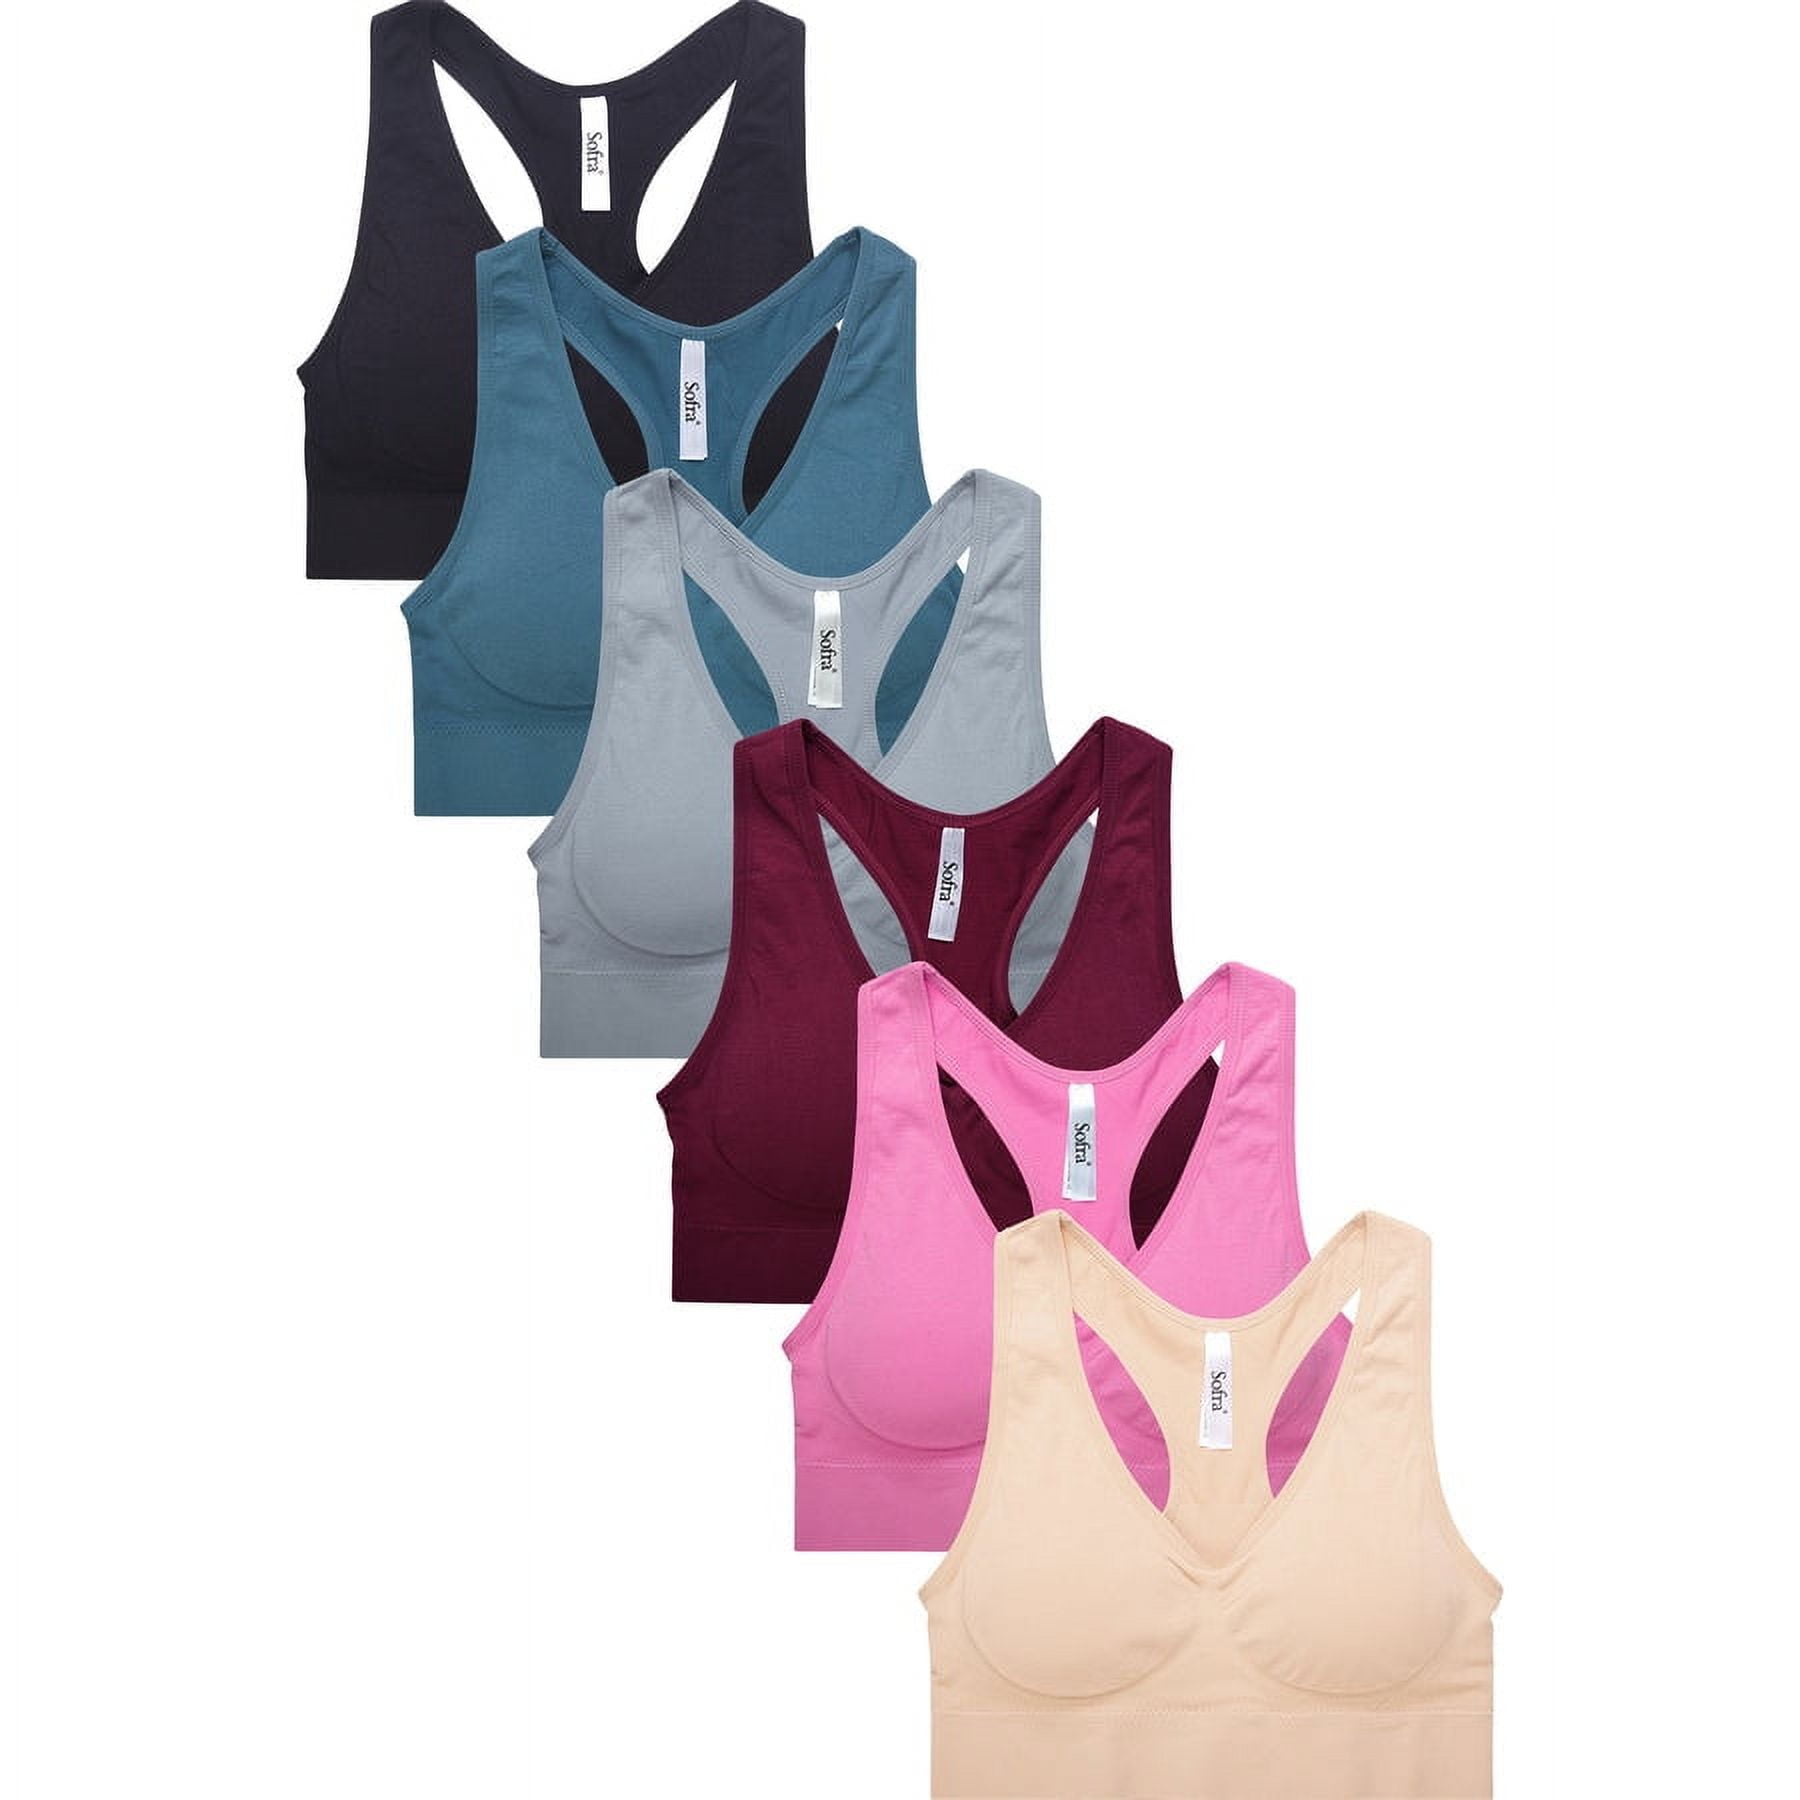 6 Packs of Sofra Women's Seamless Onesize Workout Fitness Gym